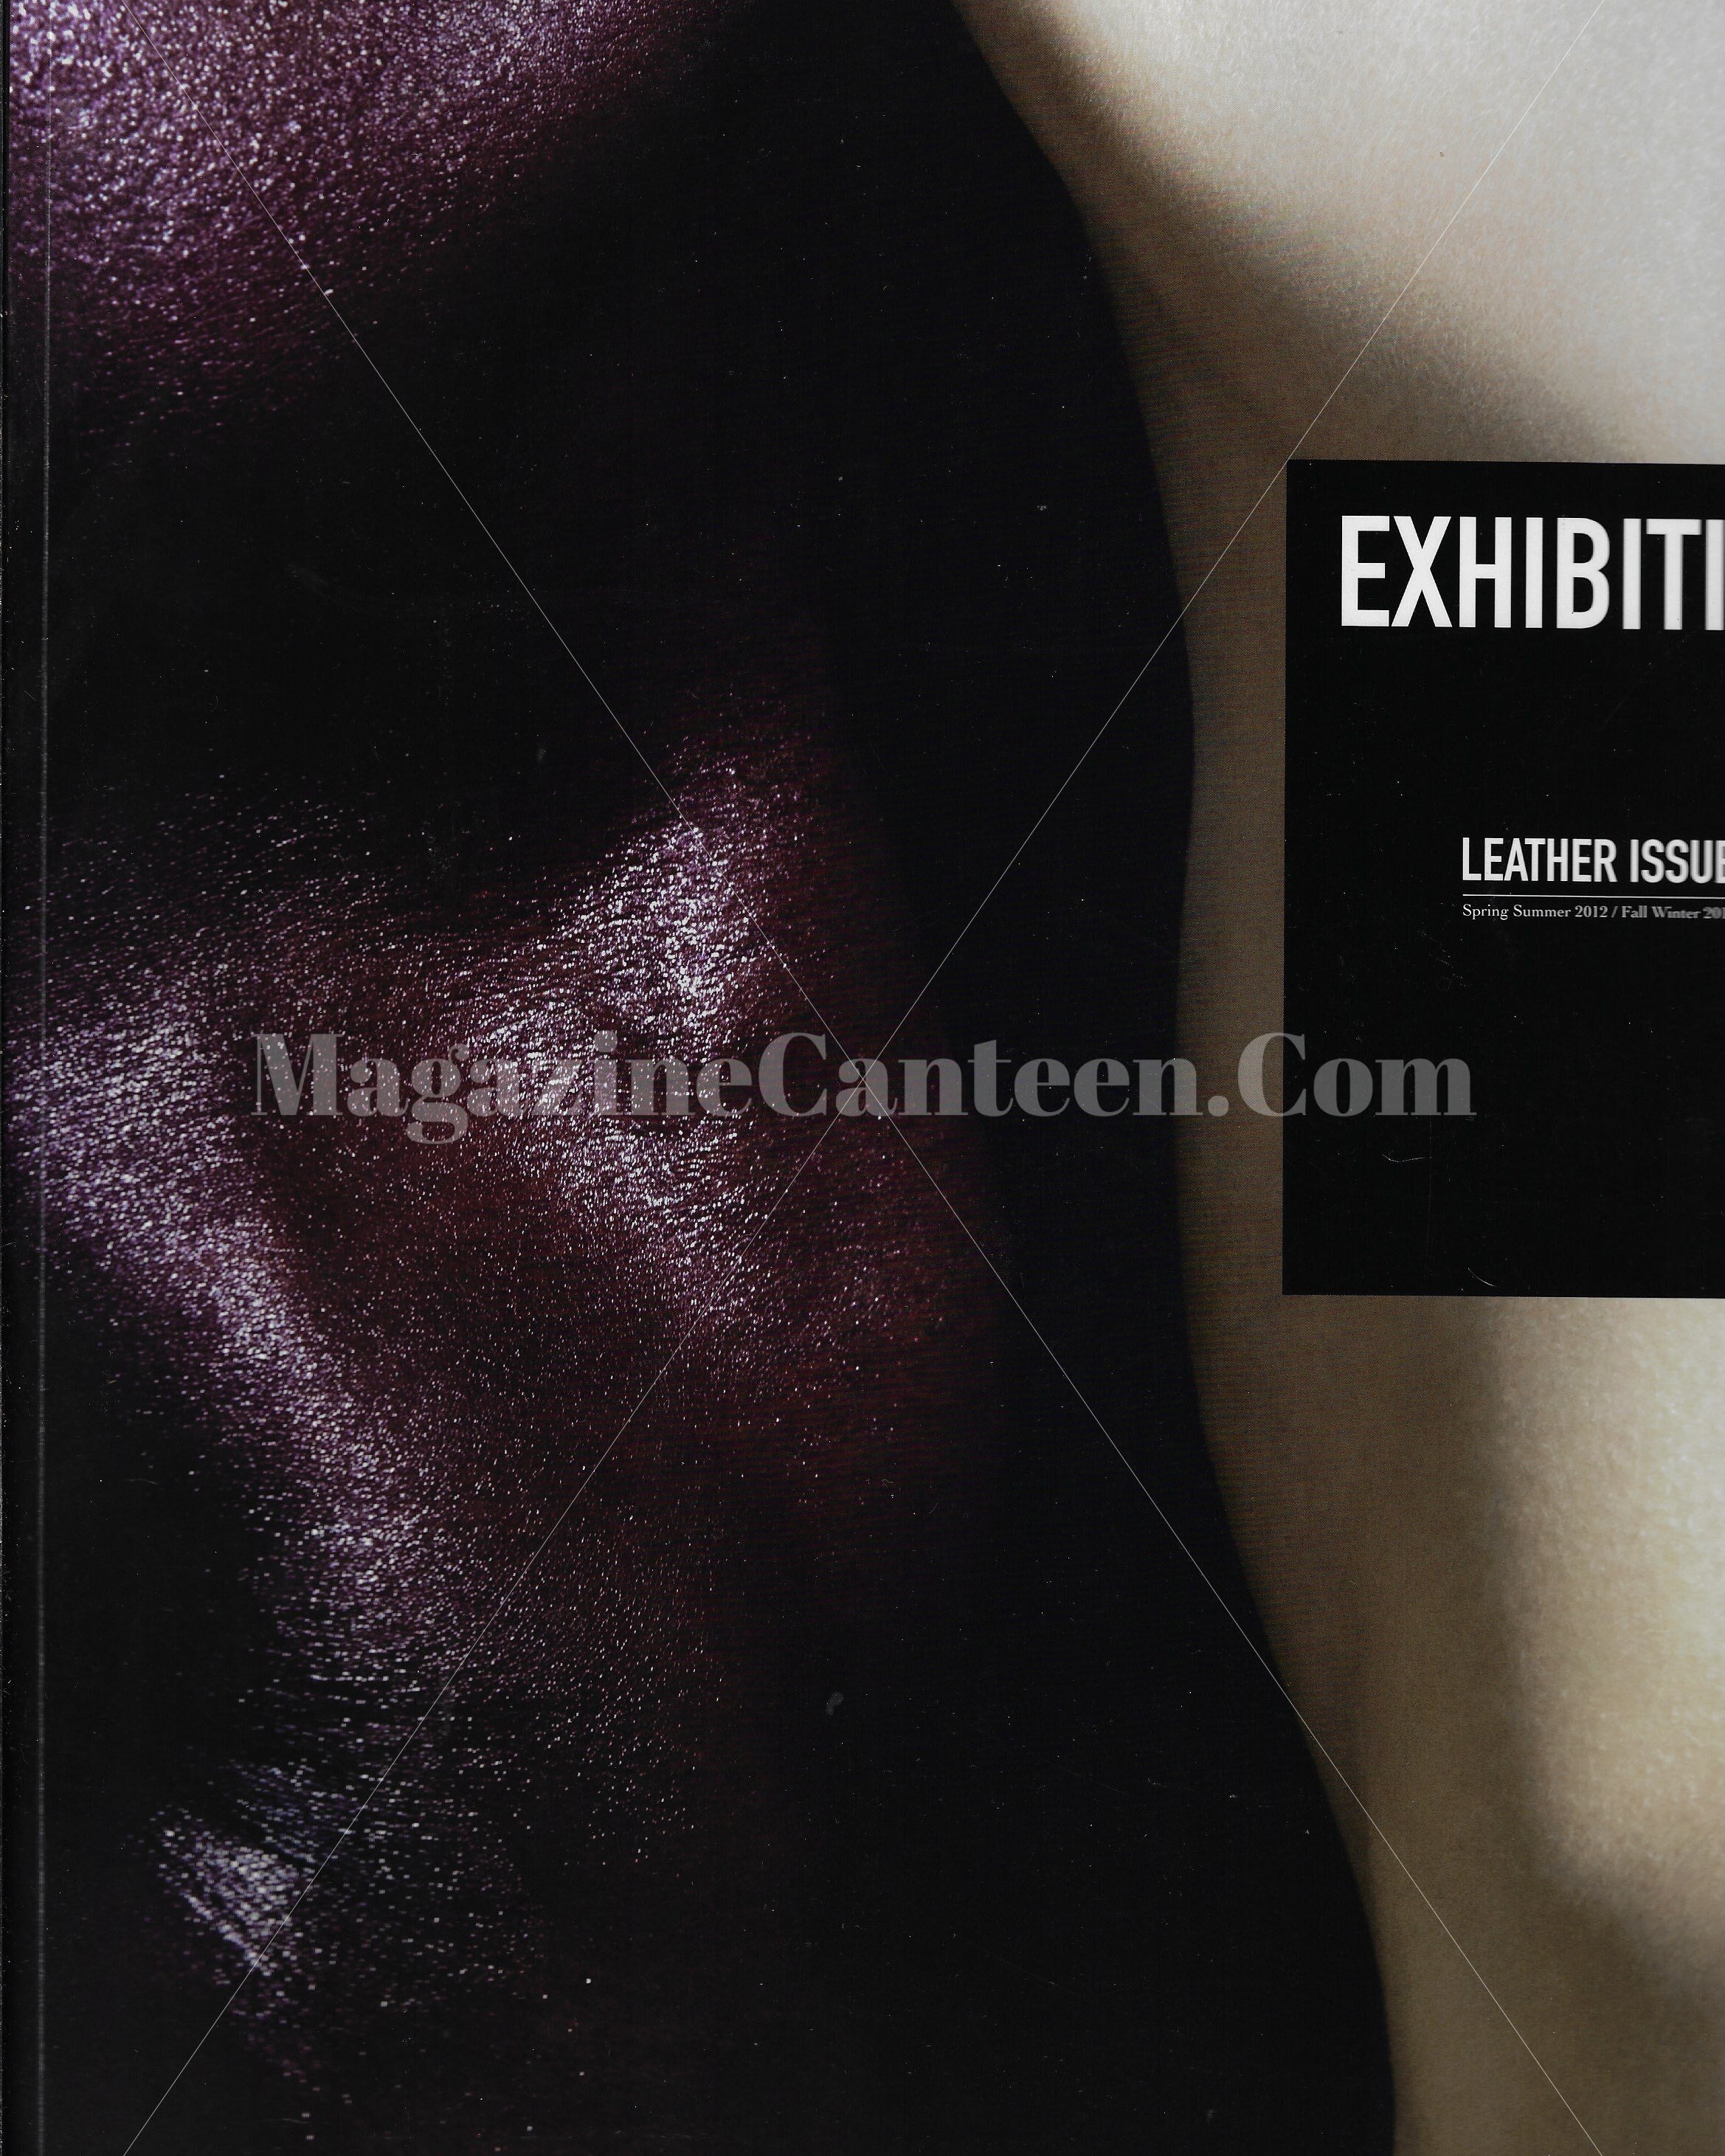 Exhibition Magazine - The Leather Issue Willy Vanderperre